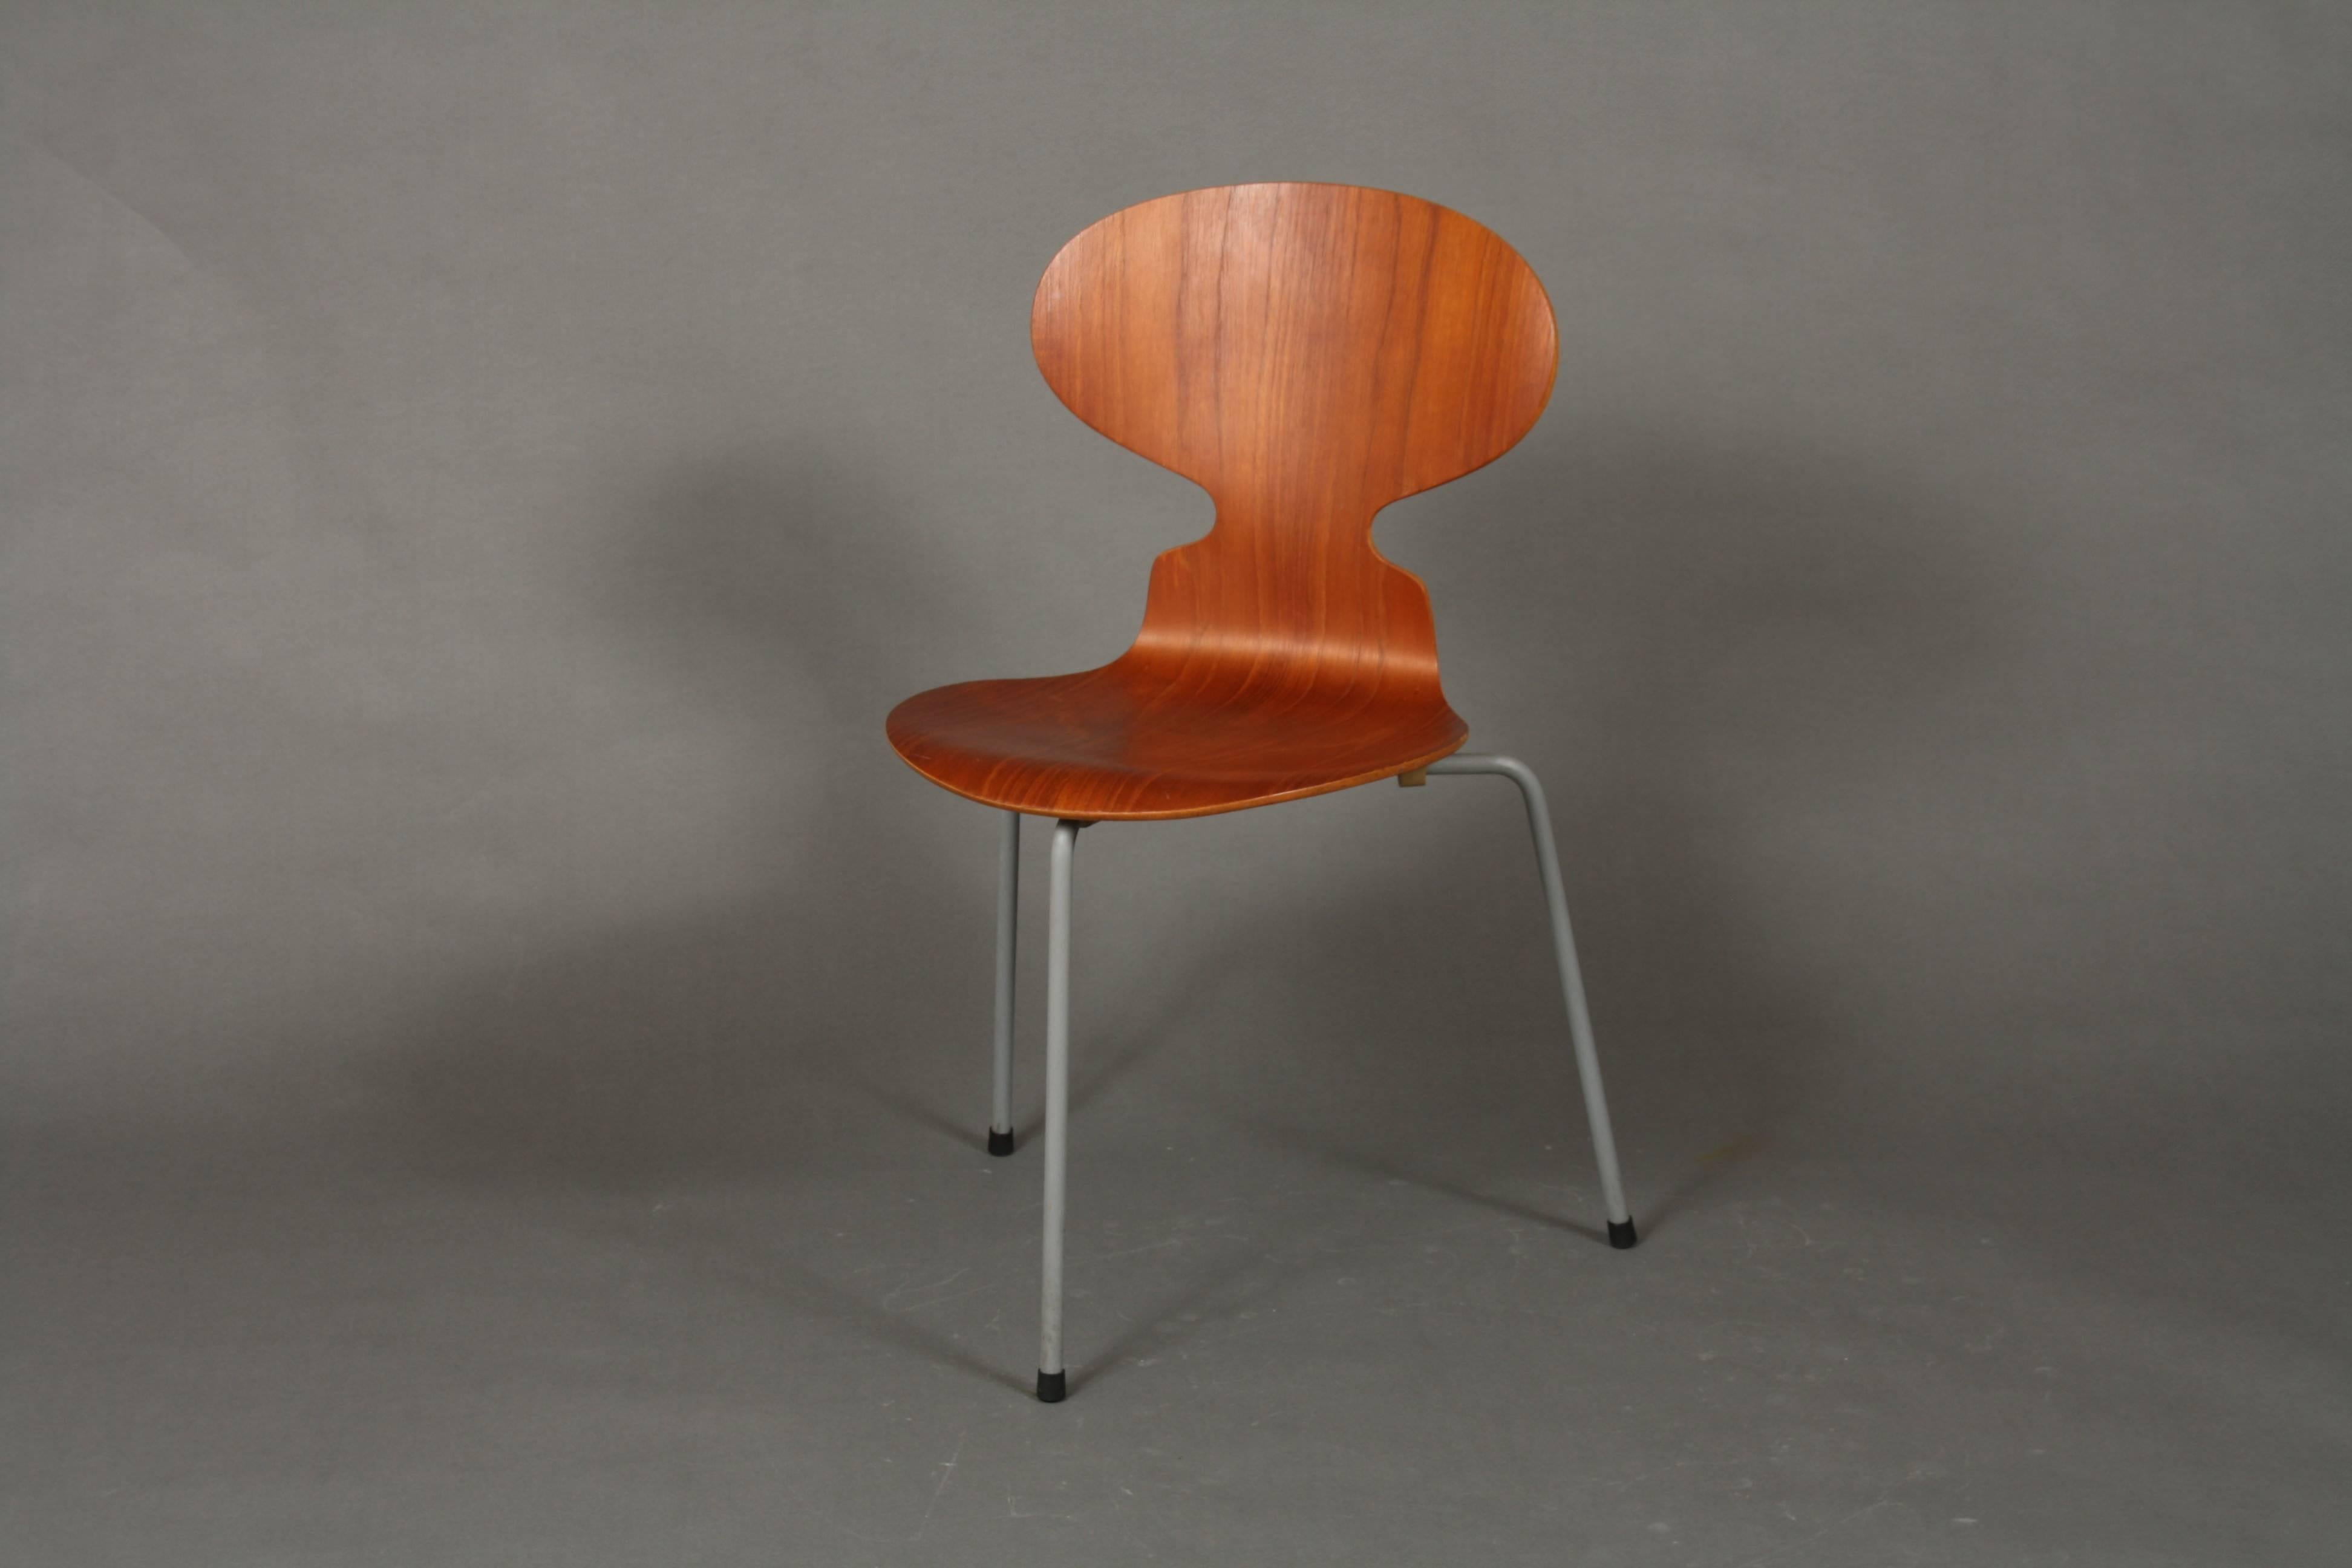 Set of two teak early three legged Arne Jacobsen ant chairs manufactured by Fritz Hansen. The legs are original and covered with grey rubber.